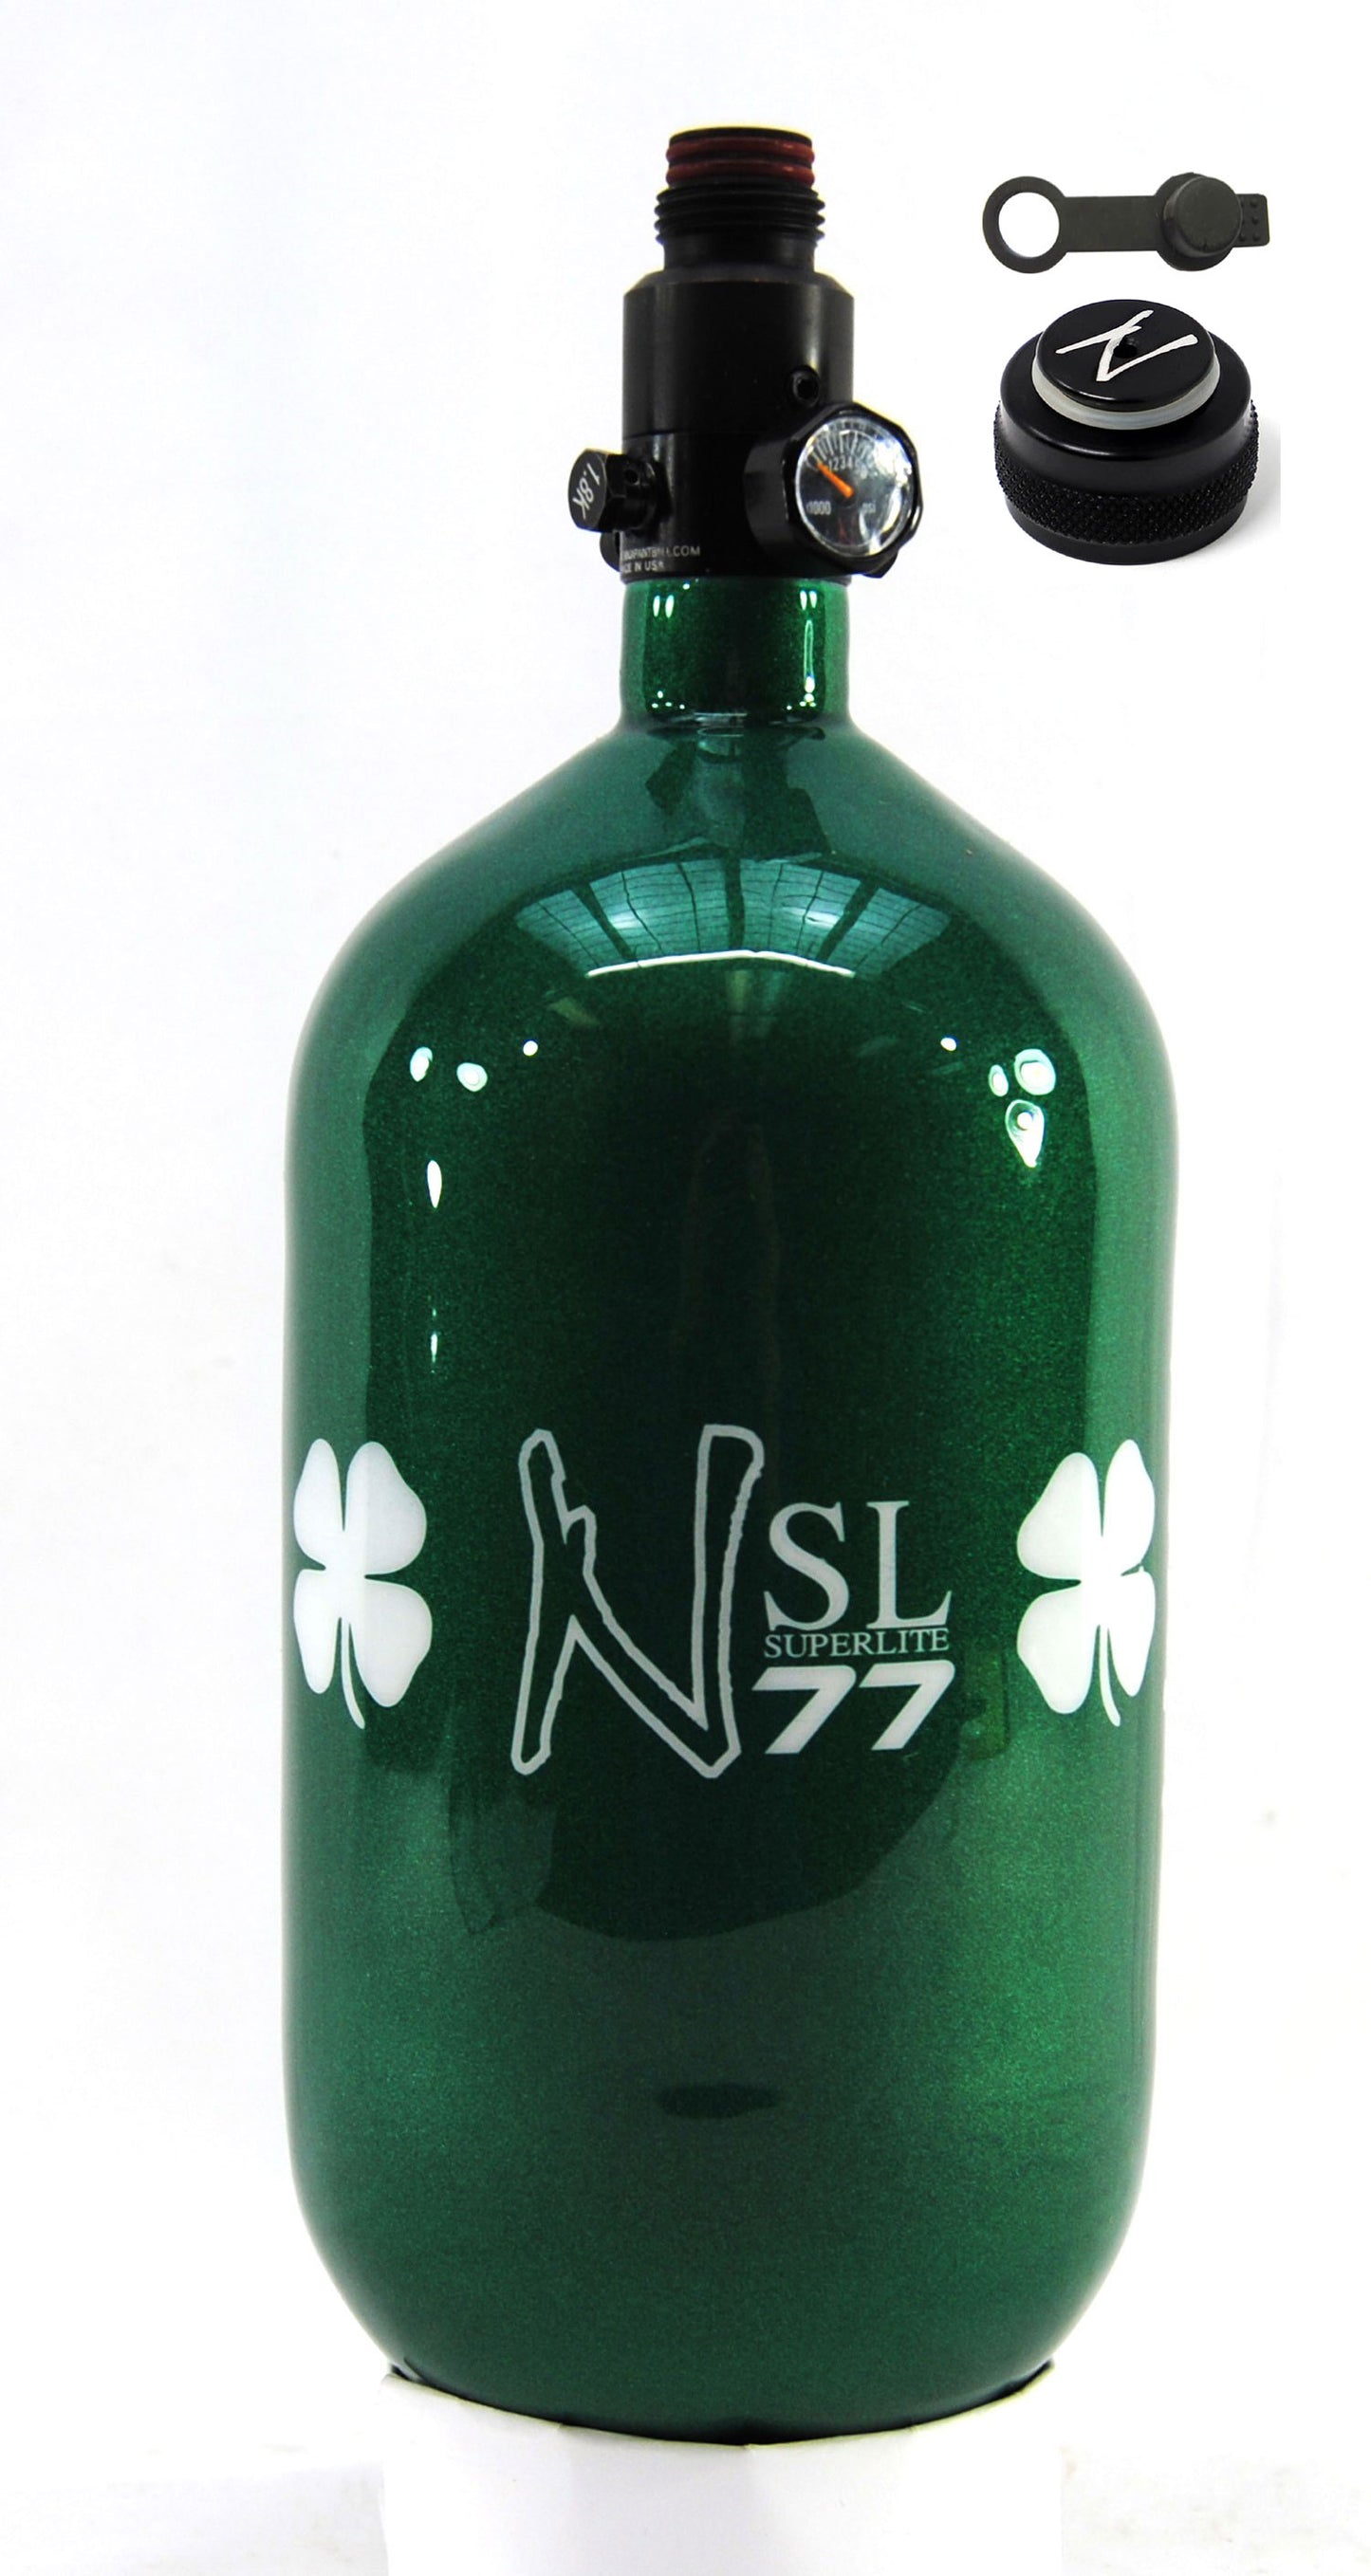 Ninja 77ci 4500psi SL2 HPA Tank with Thread Protector/Nipple Cover - Limited Edition St. Patrick's Day Lucky Clover - Ninja Paintball